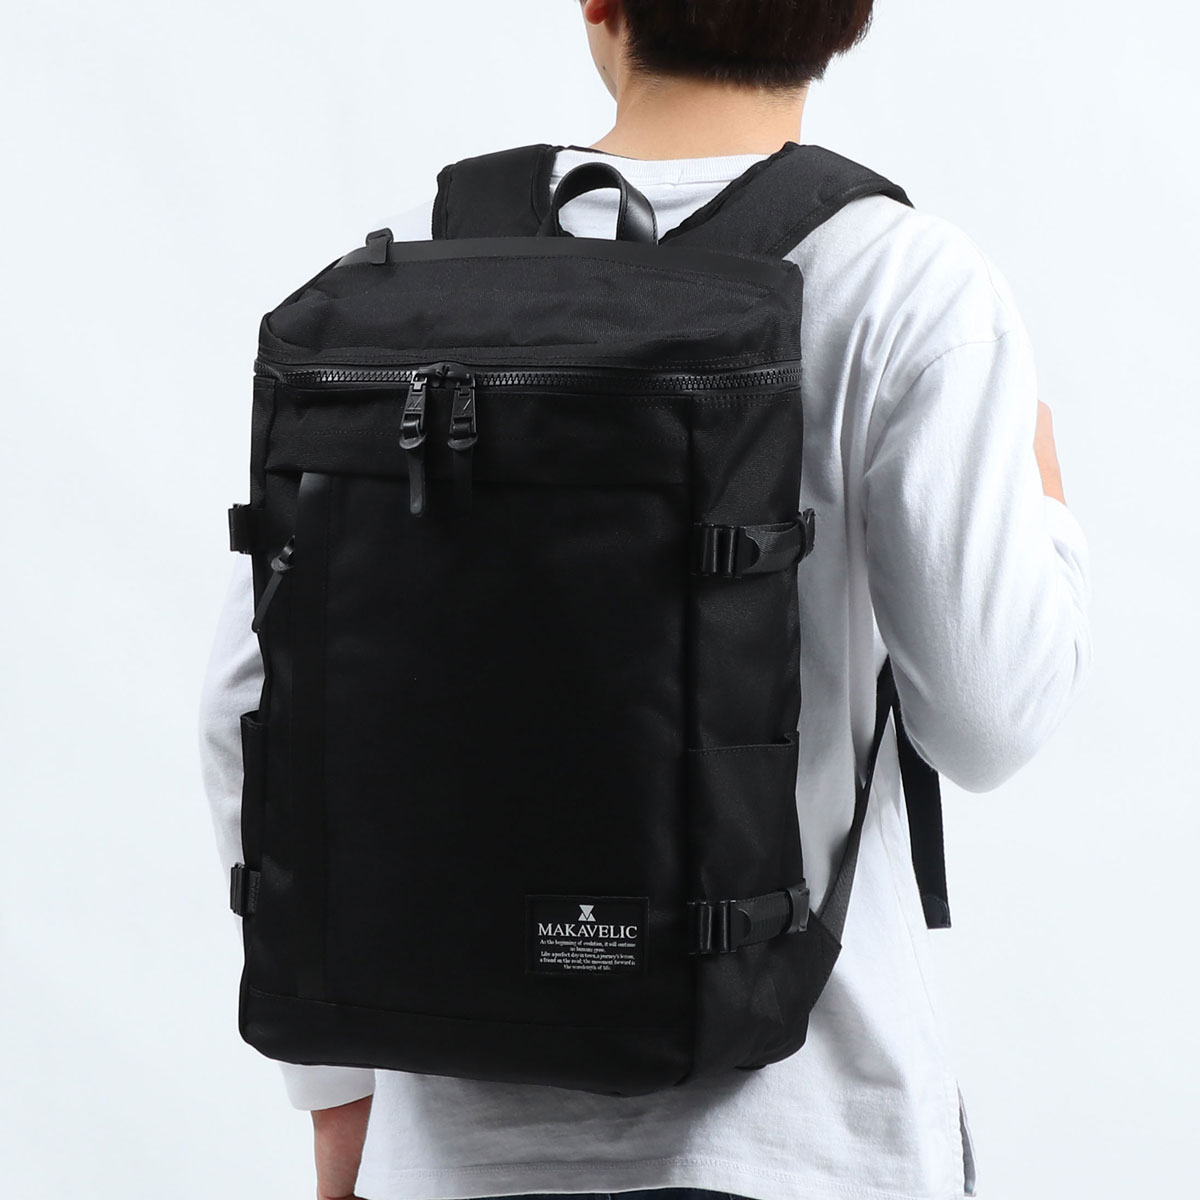 MAKAVELIC マキャベリック CHASE RECTANGLE DAYPACK 25L 3106-10121 